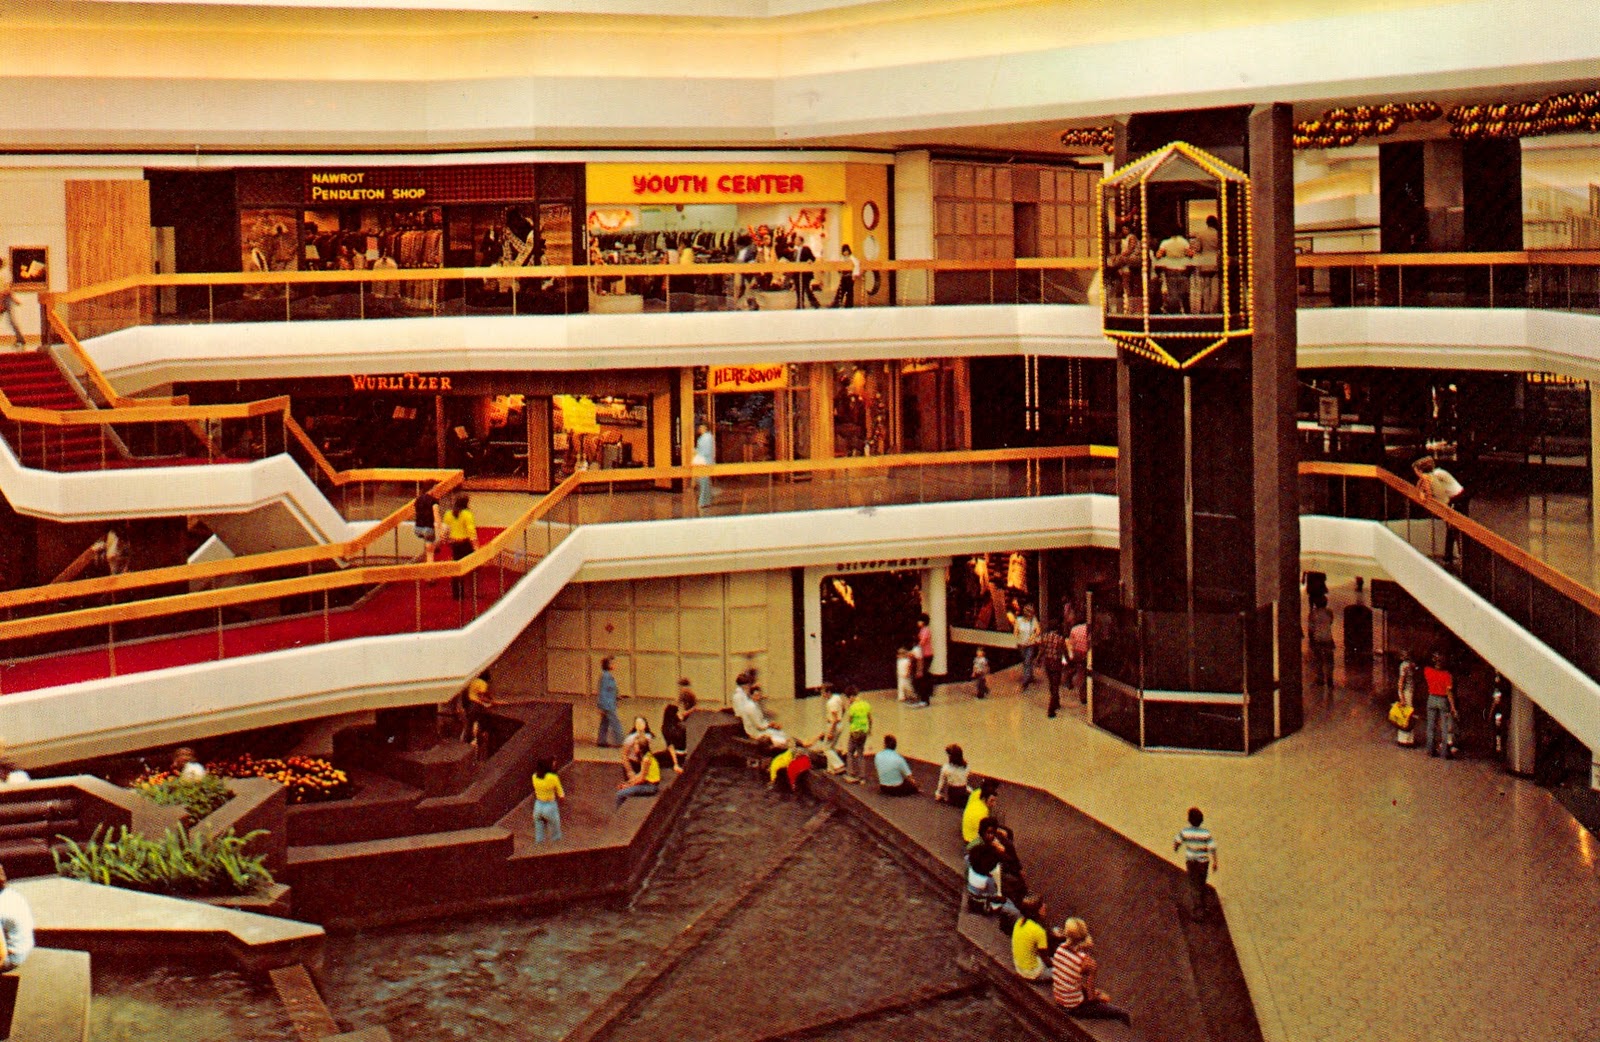 David Cobb Craig: Selections From My Collection of Mall Post Cards